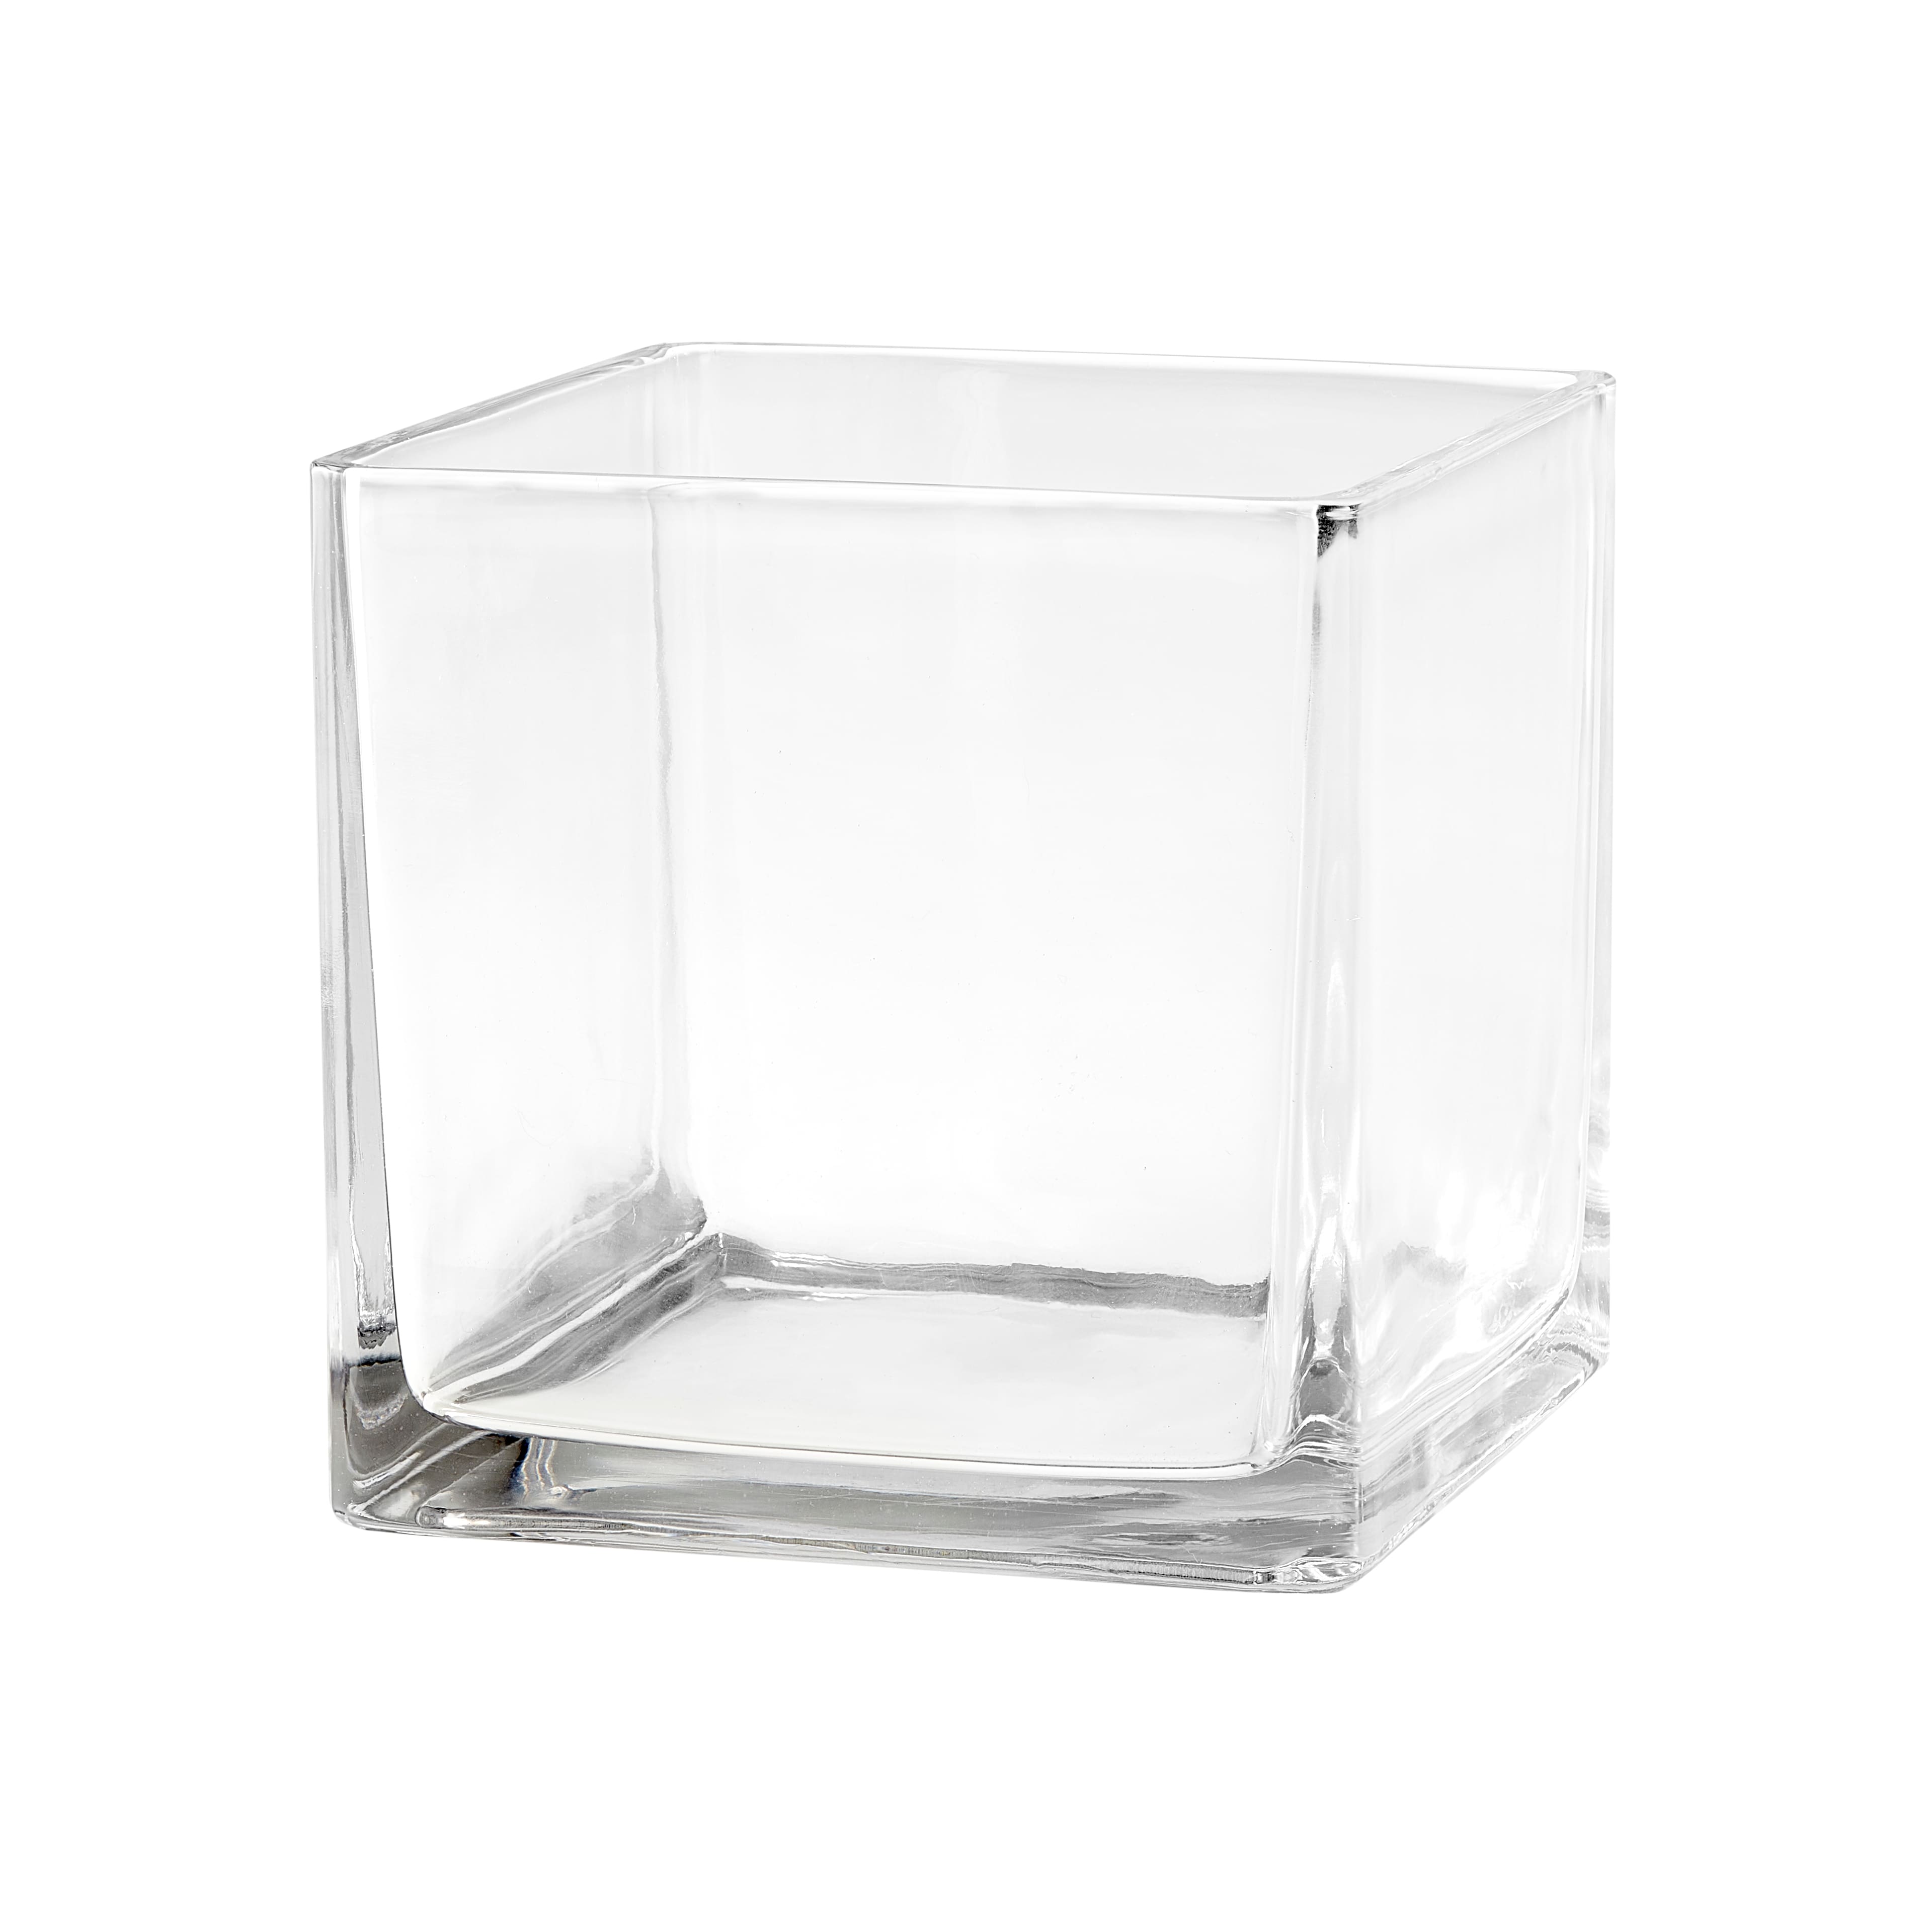 Intuition fragment Skriv email 6" Square Glass Vase by Ashland® | Michaels